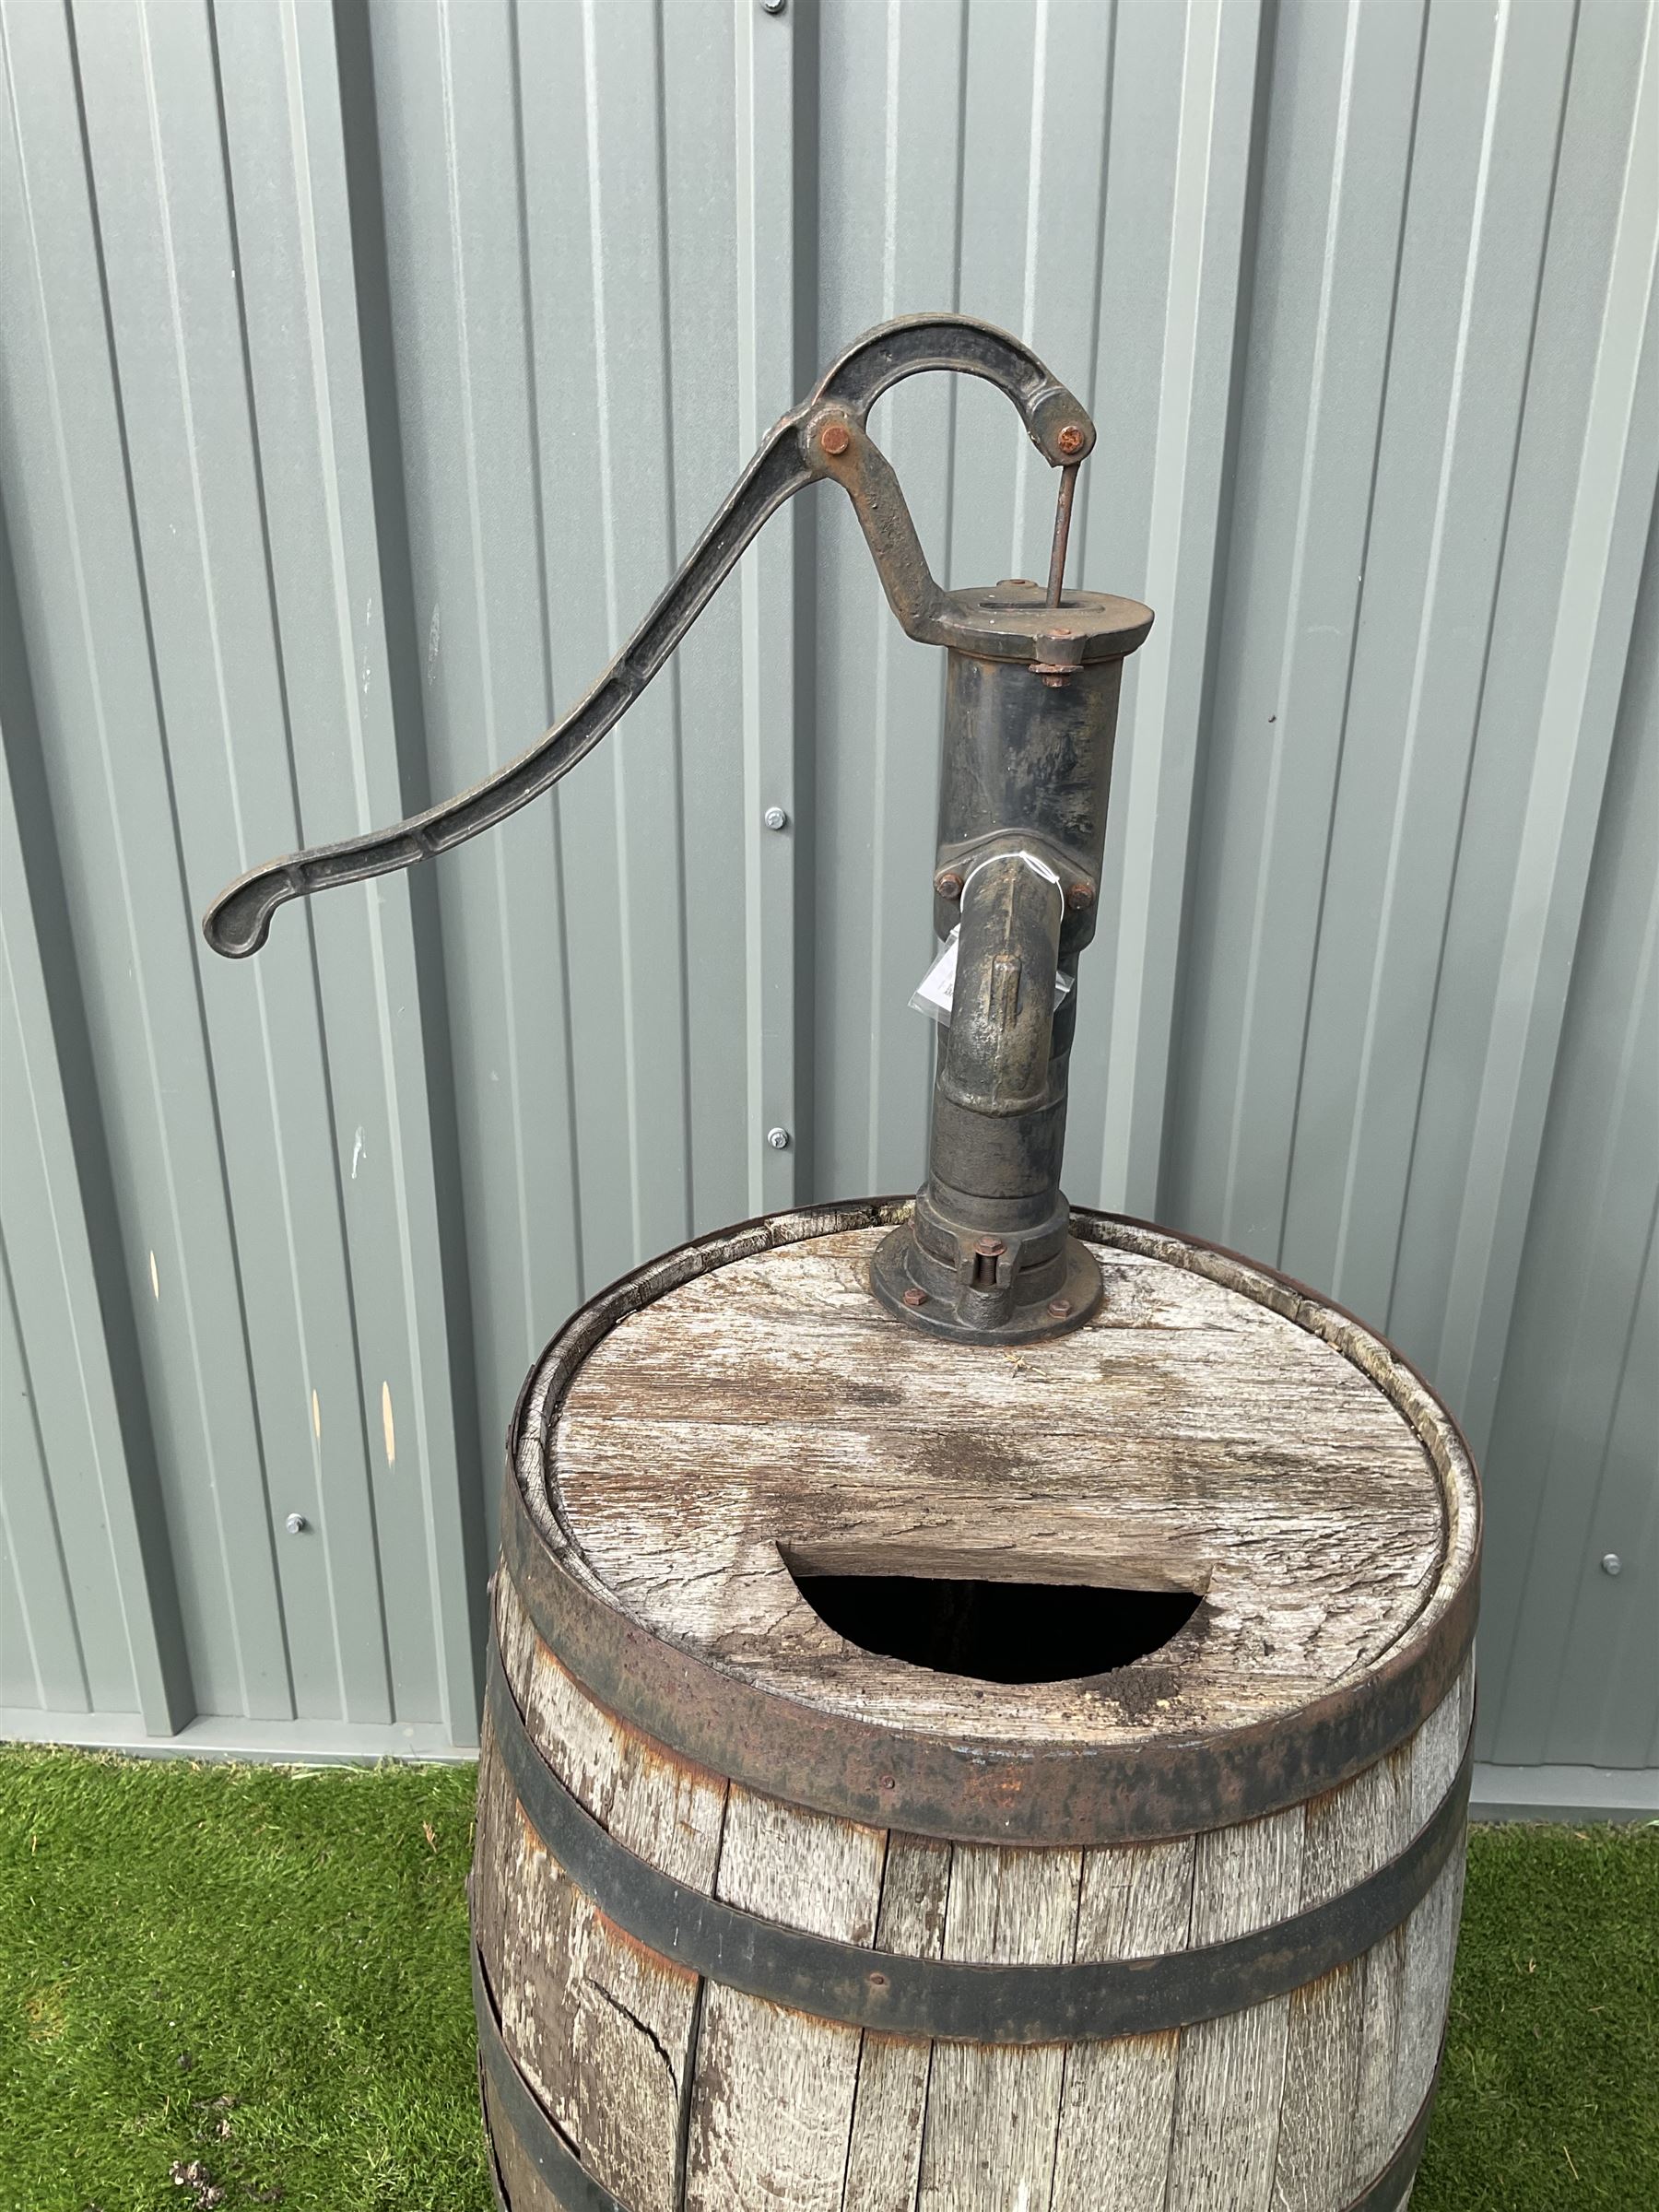 Coopered barrel with cast iron pump - Image 2 of 4